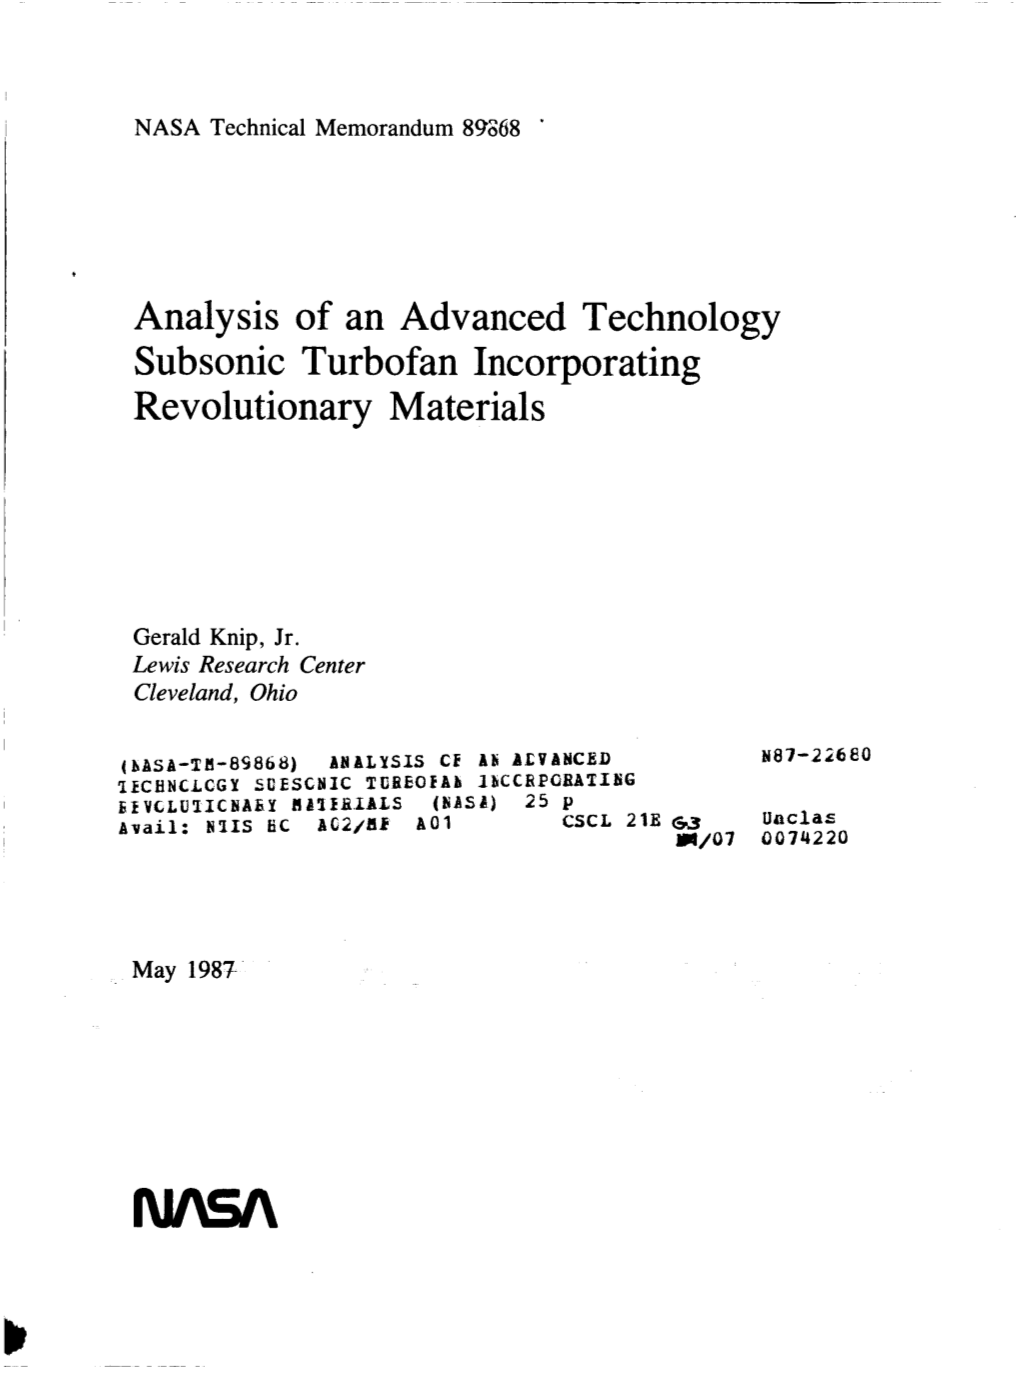 Analysis of an Advanced Technology Subsonic Turbofan Incorporating Revolutionary Materials